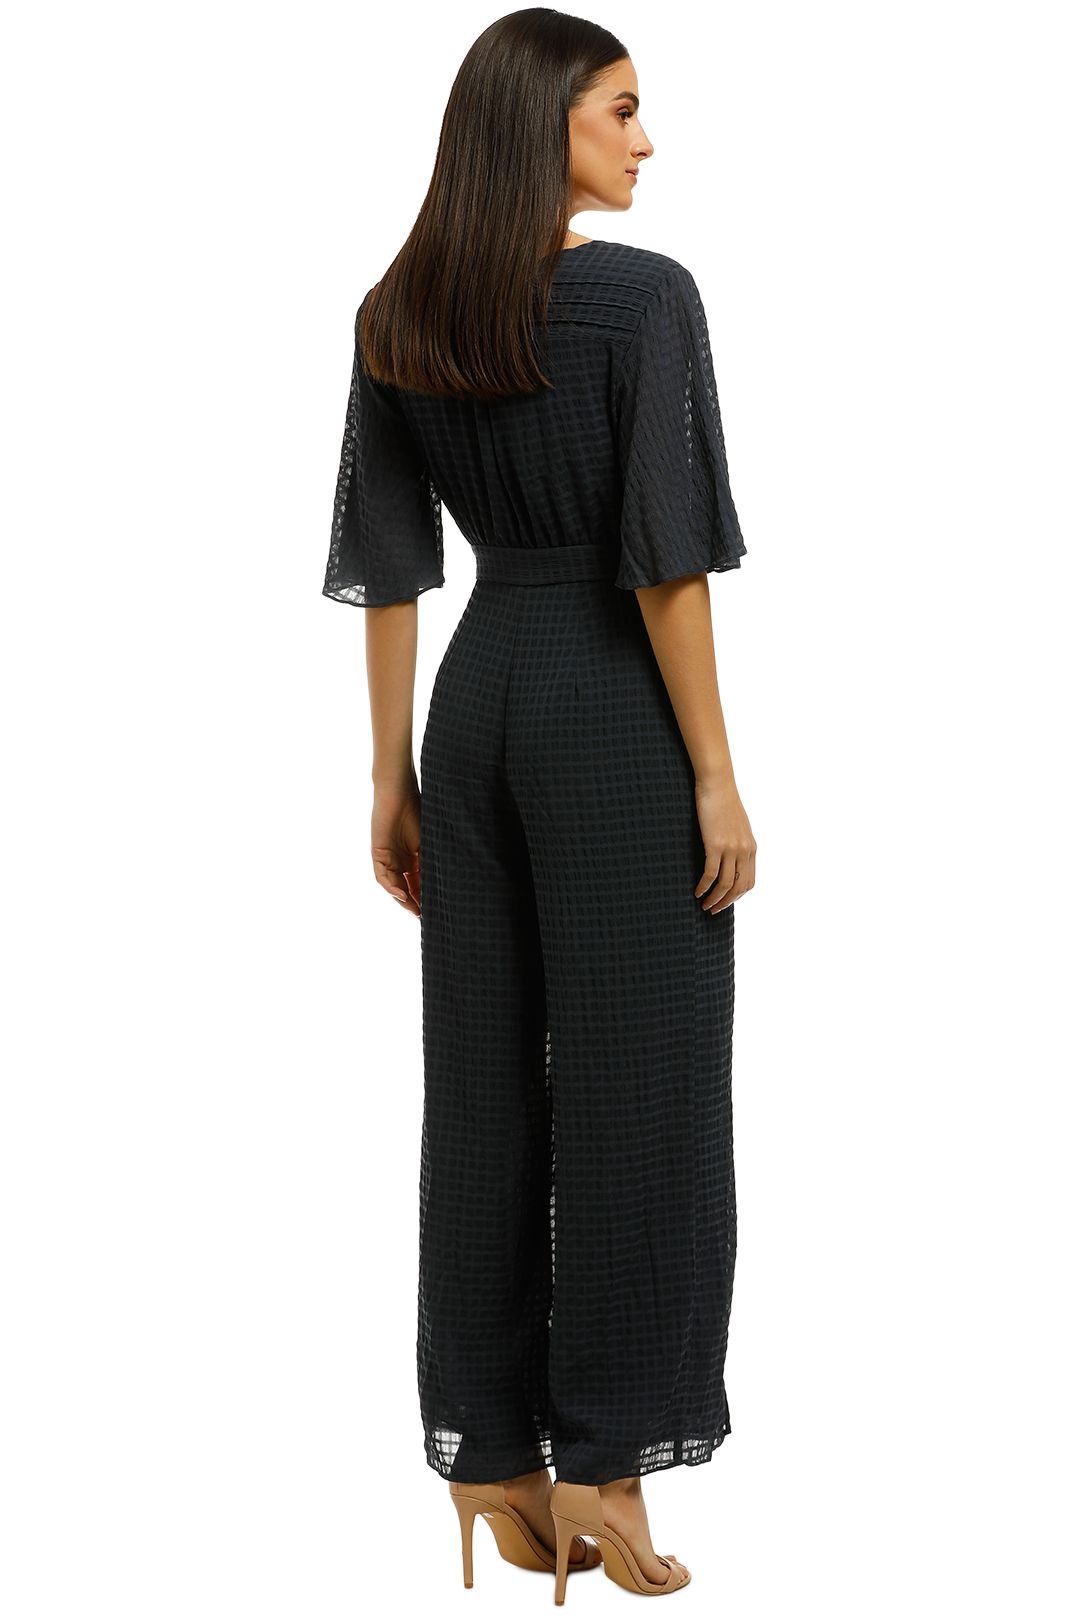 Stevie-May-How-It-Is-Jumpsuit-Navy-Back